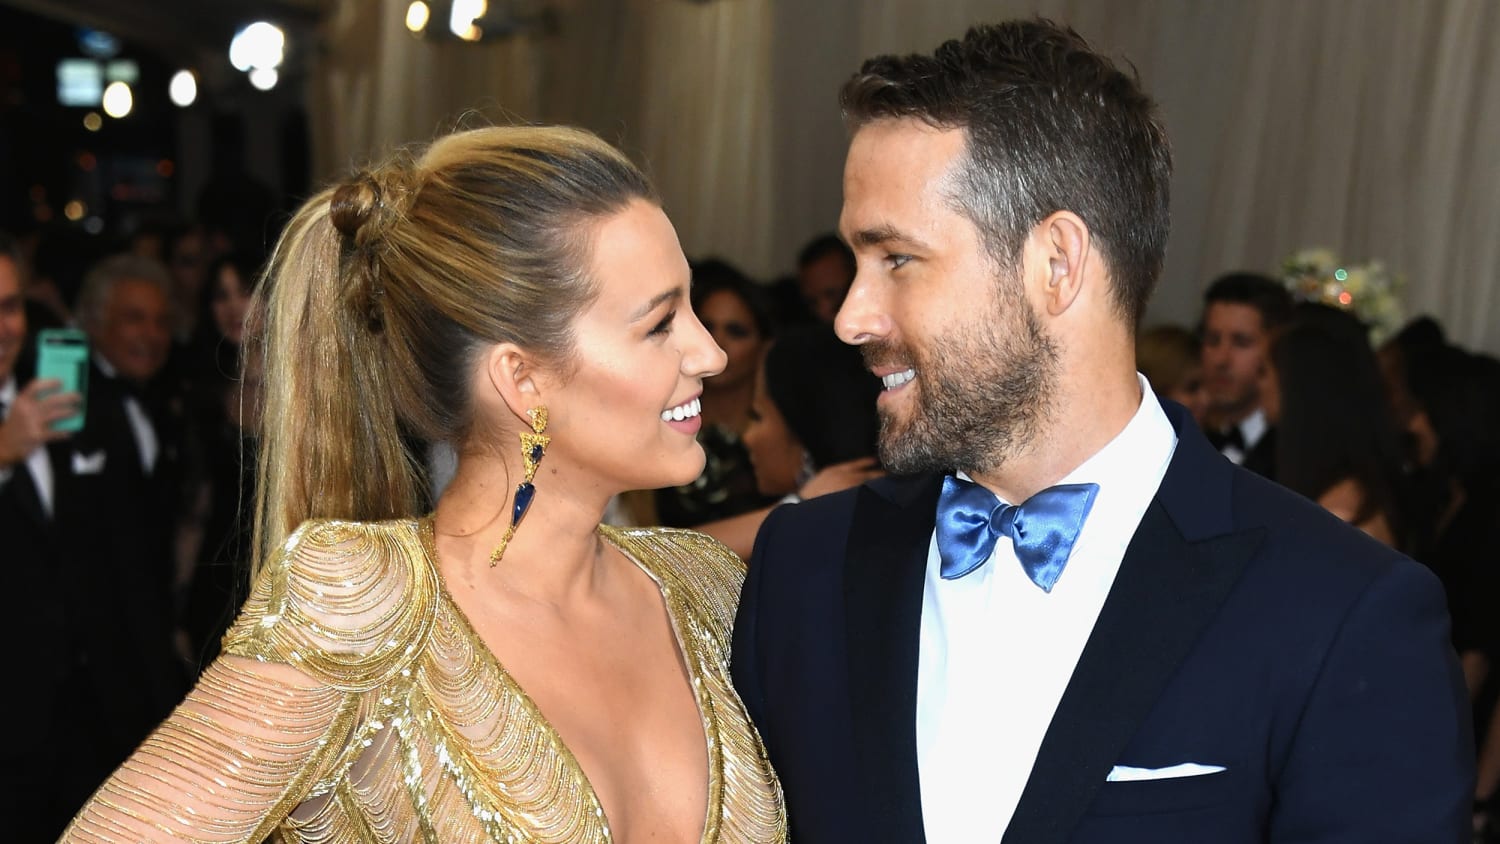 Ryan Reynolds raves about wife Blake Lively in sweet message - TODAY.com2500 x 1407